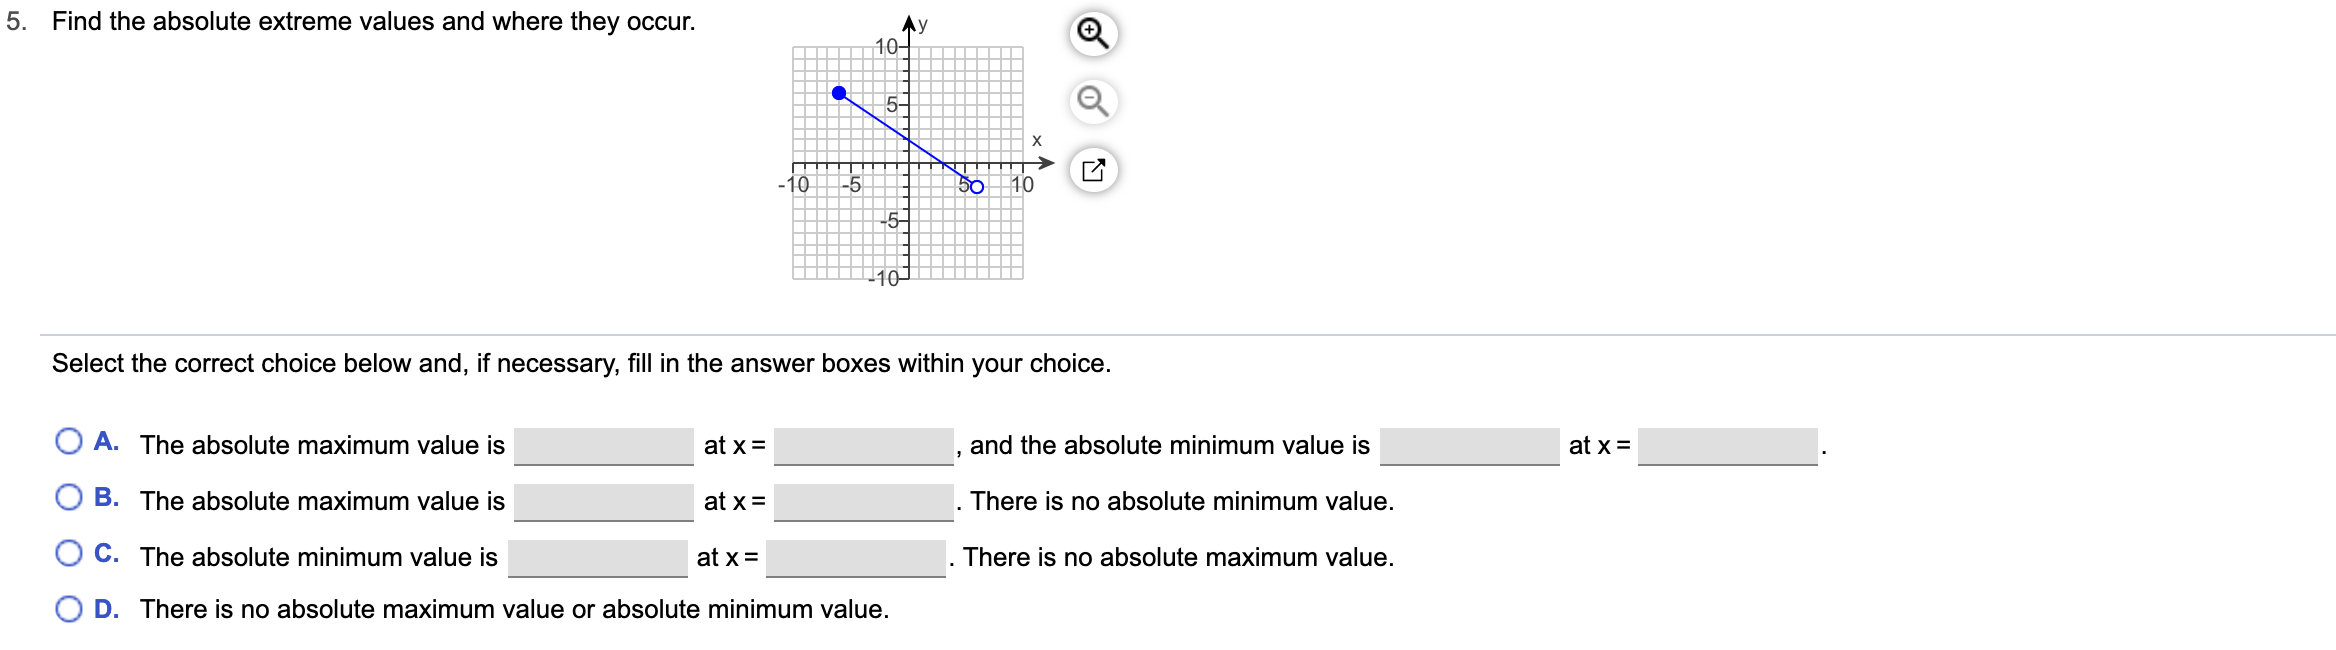 5.
Find the absolute extreme values and where they occur.
Ay
10-
X
10
-5
50
10
5-
Select the correct choice below and, if necessary, fill in the answer boxes within your choice.
A. The absolute maximum value is
and the absolute minimum value is
at x=
at x =
B. The absolute maximum value is
There is no absolute minimum value
at x
C. The absolute minimum value is
at x =
There is no absolute maximum value.
O D. There is no absolute maximum value or absolute minimum value.
